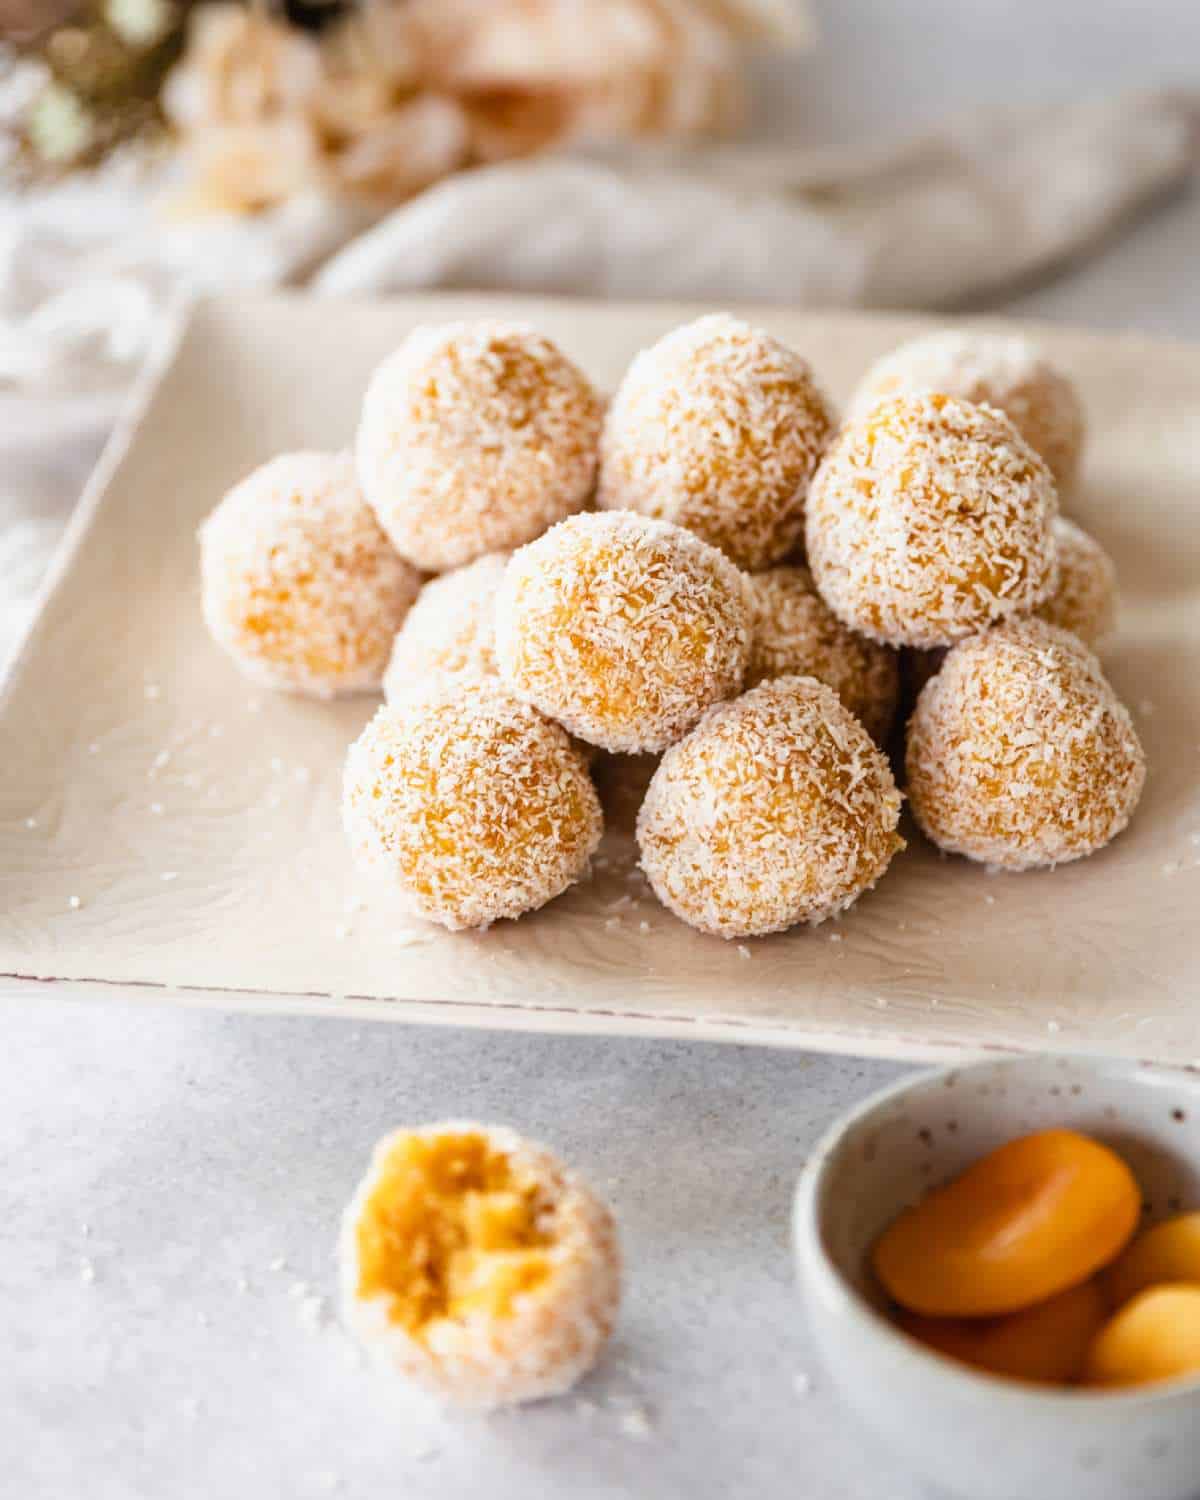 Apricot Bliss Balls stacked on top of one another, served on a off white square plate.